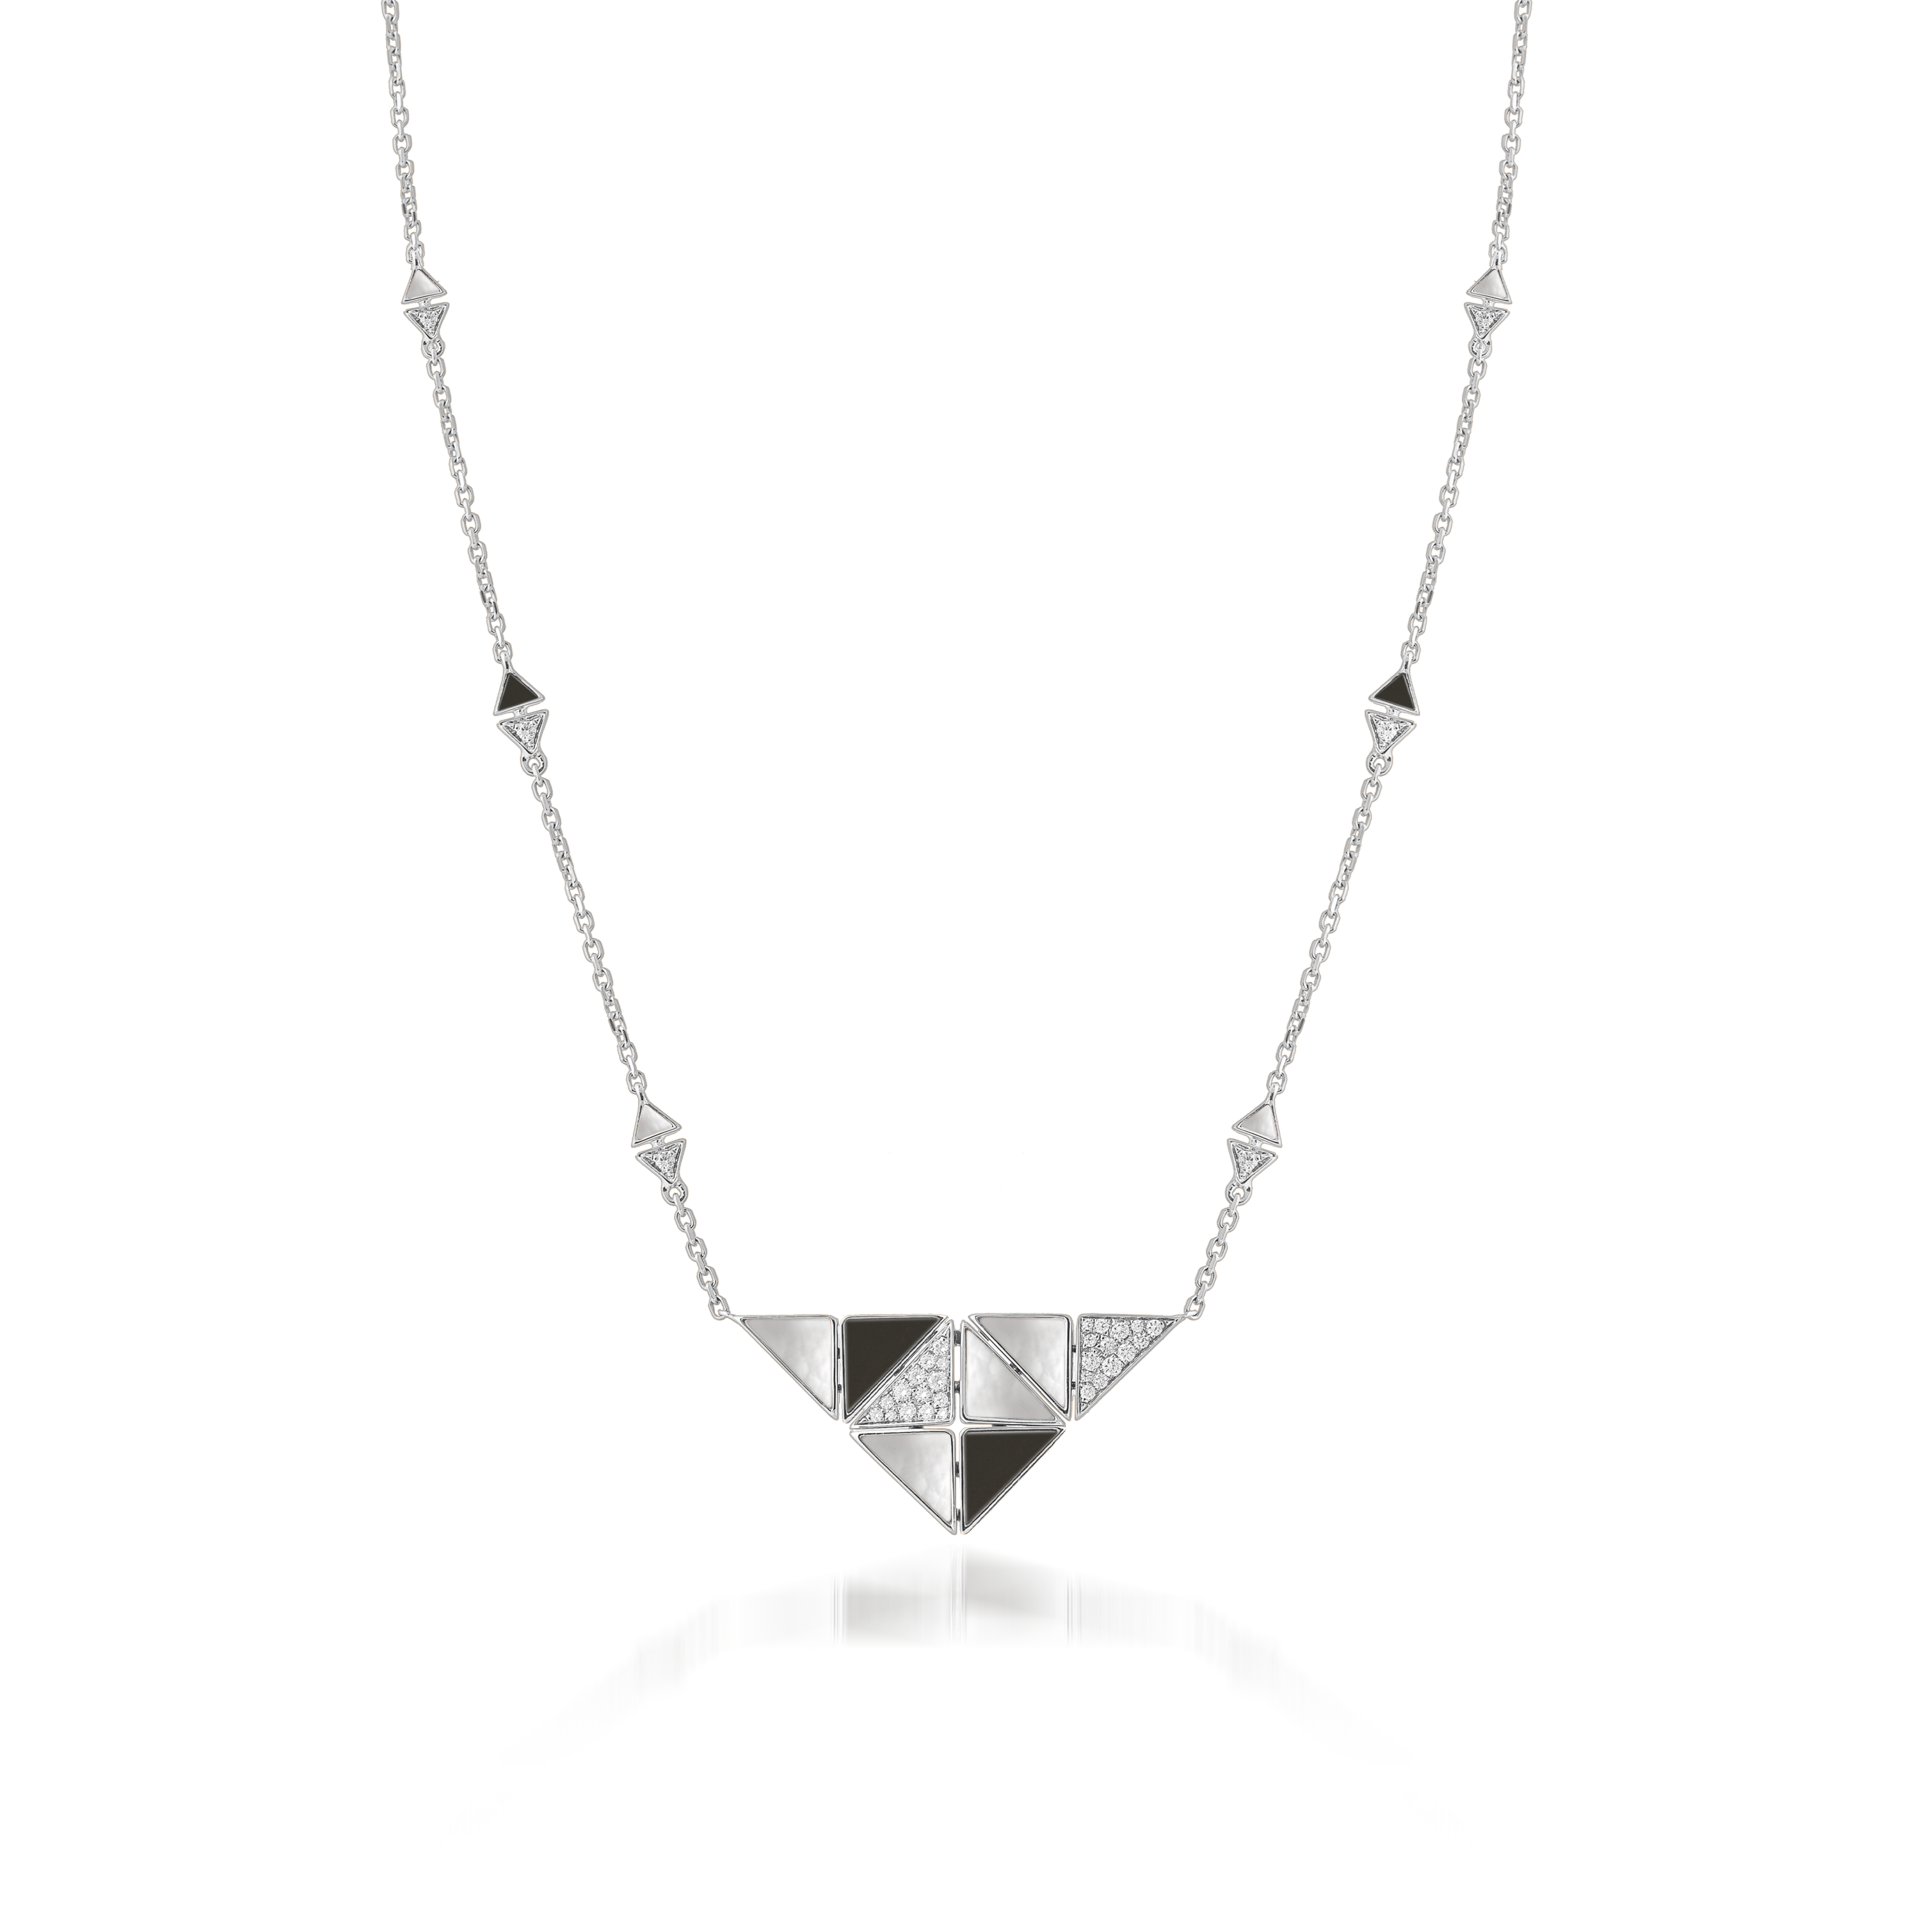 Deco Quadratic Necklace with Black Onyx, White Mother of Pearl and Diamonds  In 18K White Gold